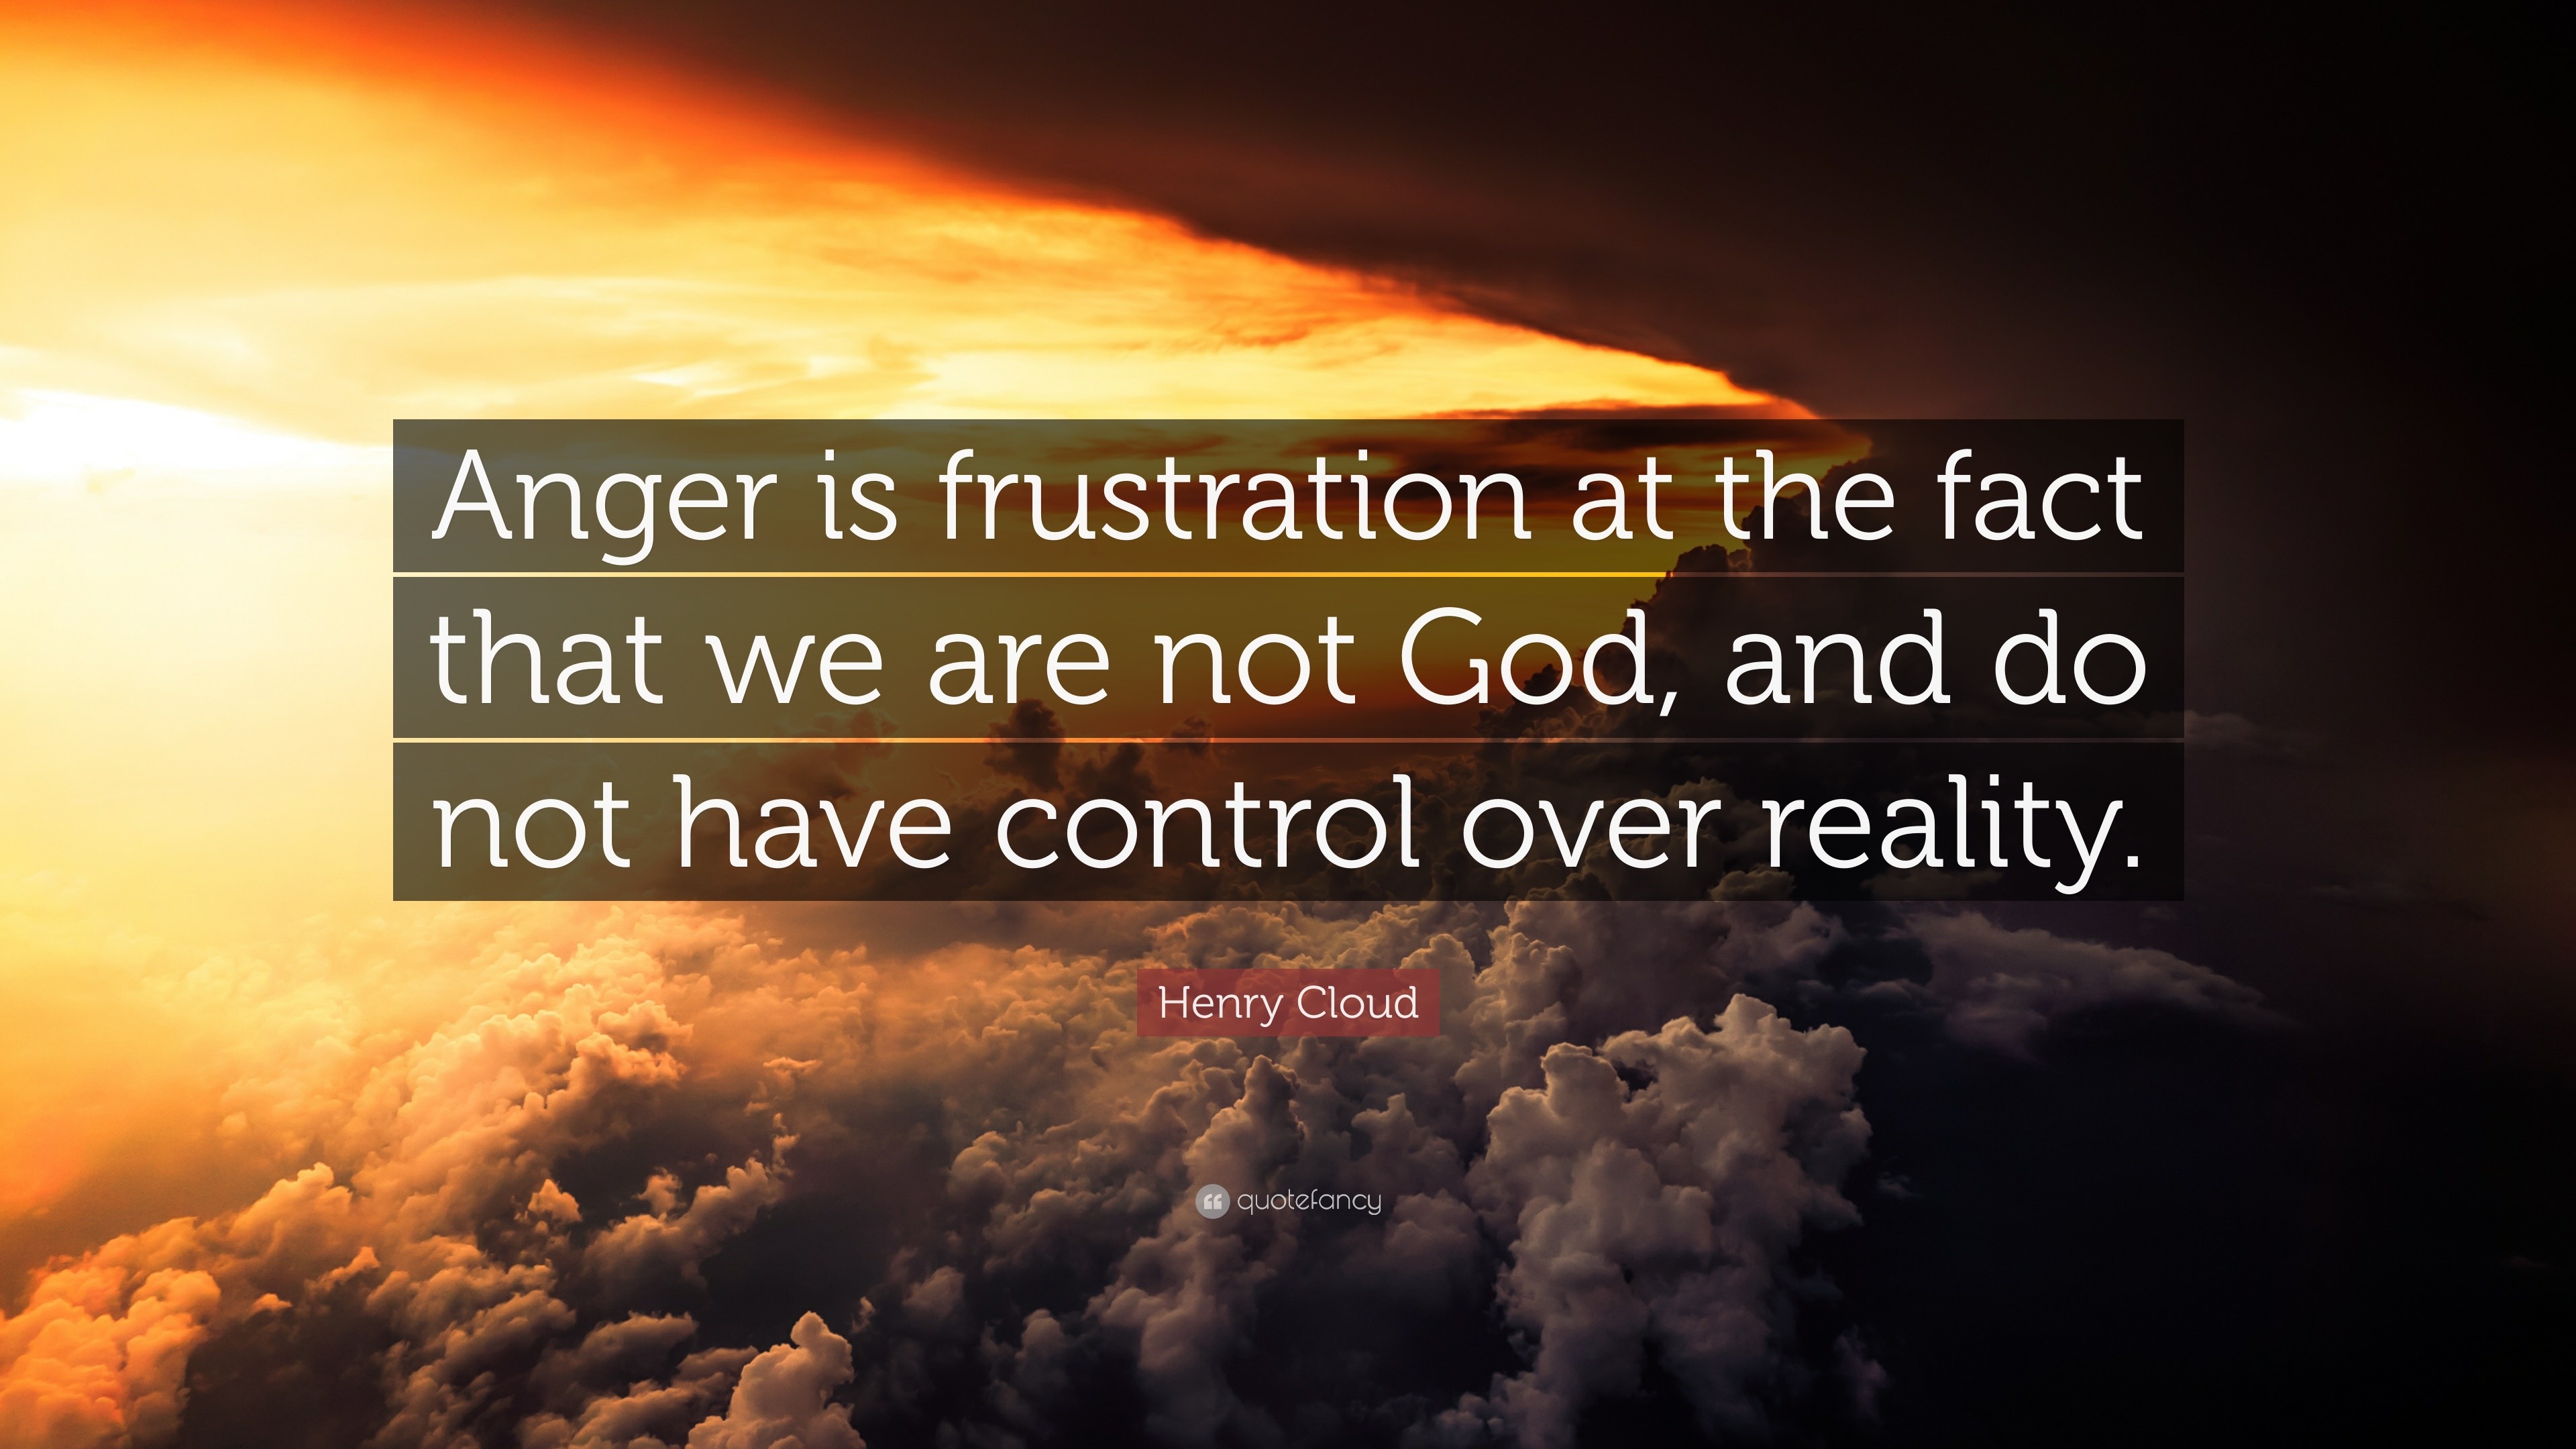 Henry Cloud Quote: “Anger is frustration at the fact that we are not